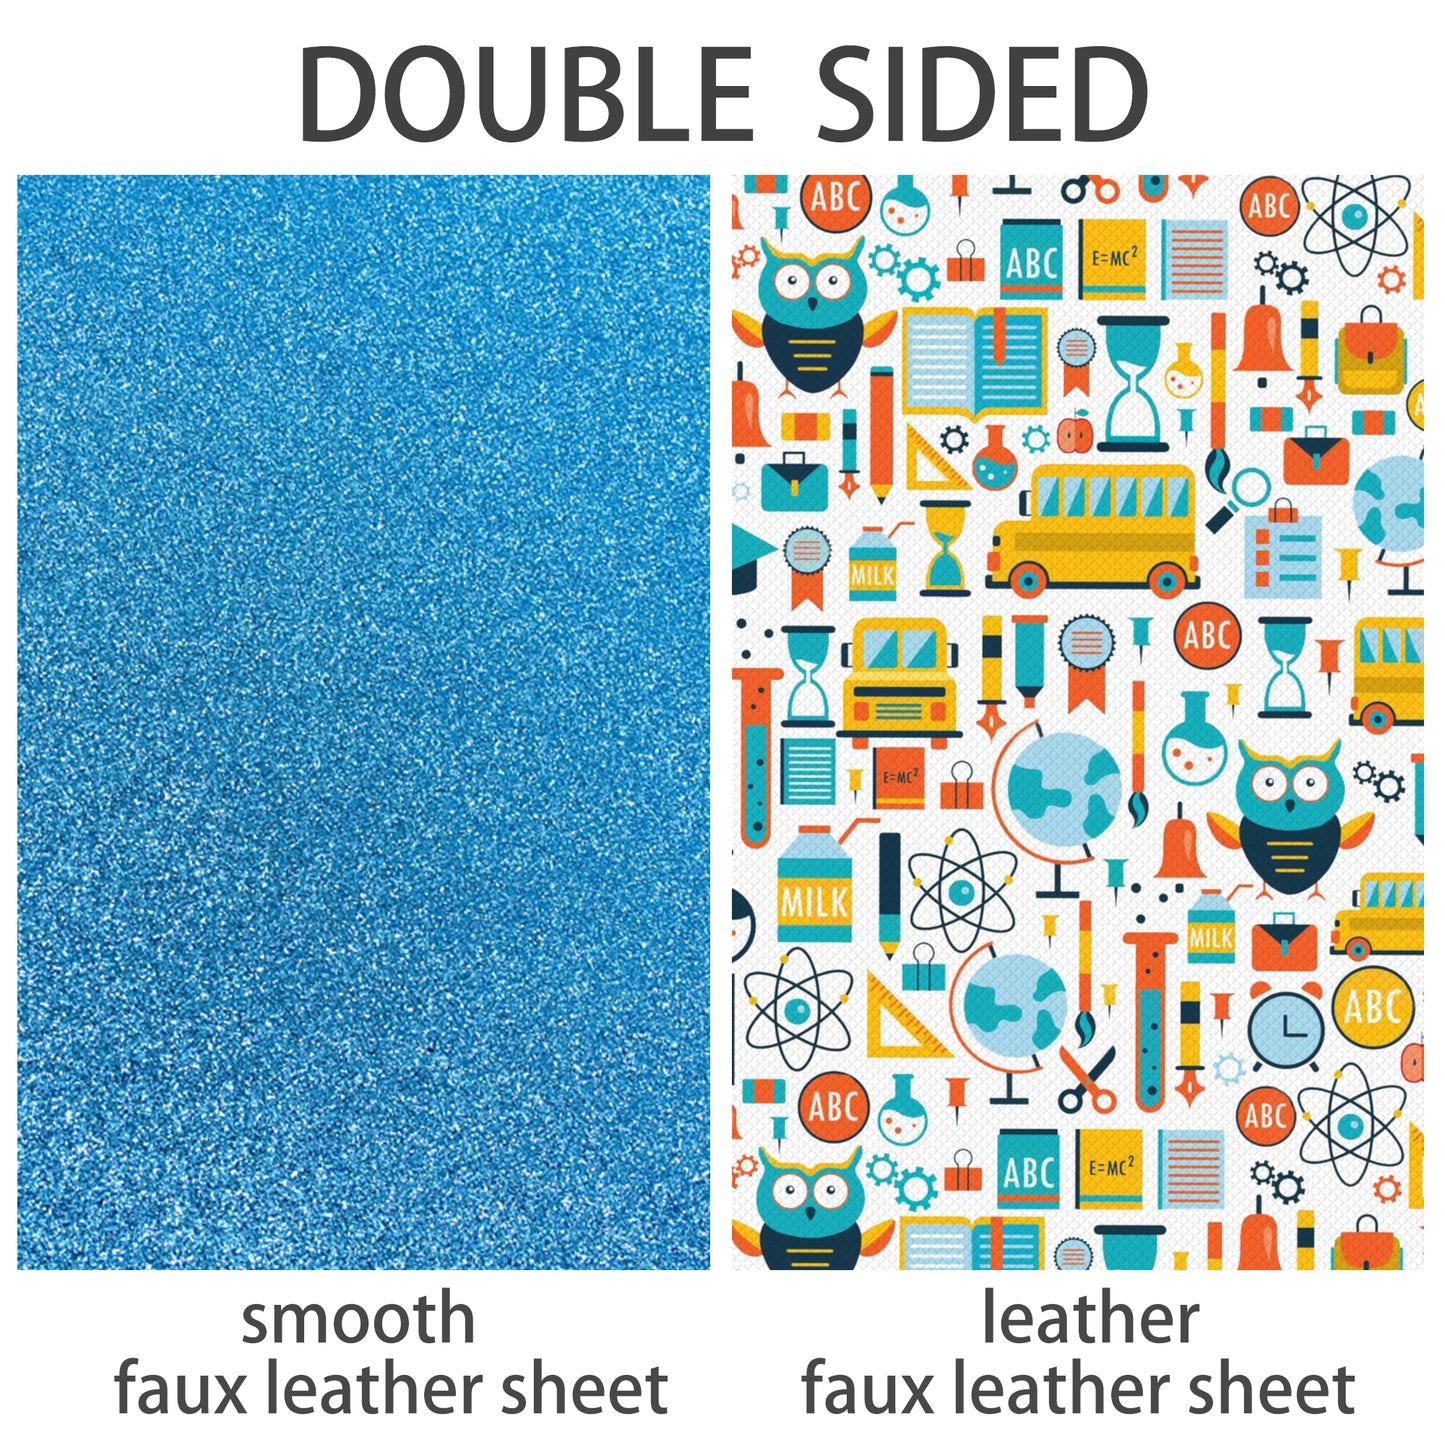 Back to School Double Sided Faux Leather Sheets Wholesale